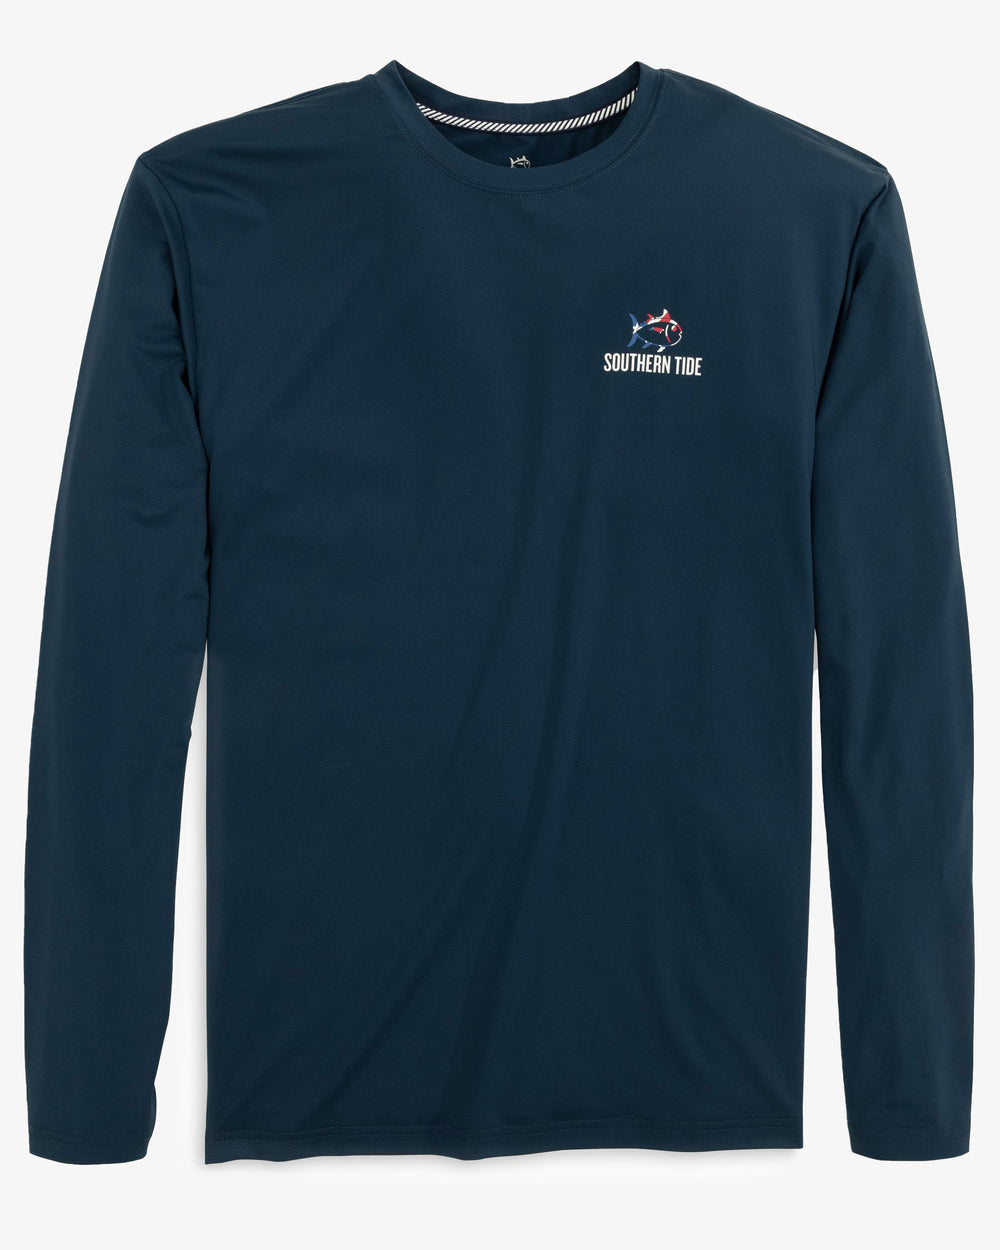 The front view of the Men's Flag Cutout Long Sleeve Performance T-Shirt by Southern Tide - Specular Blue